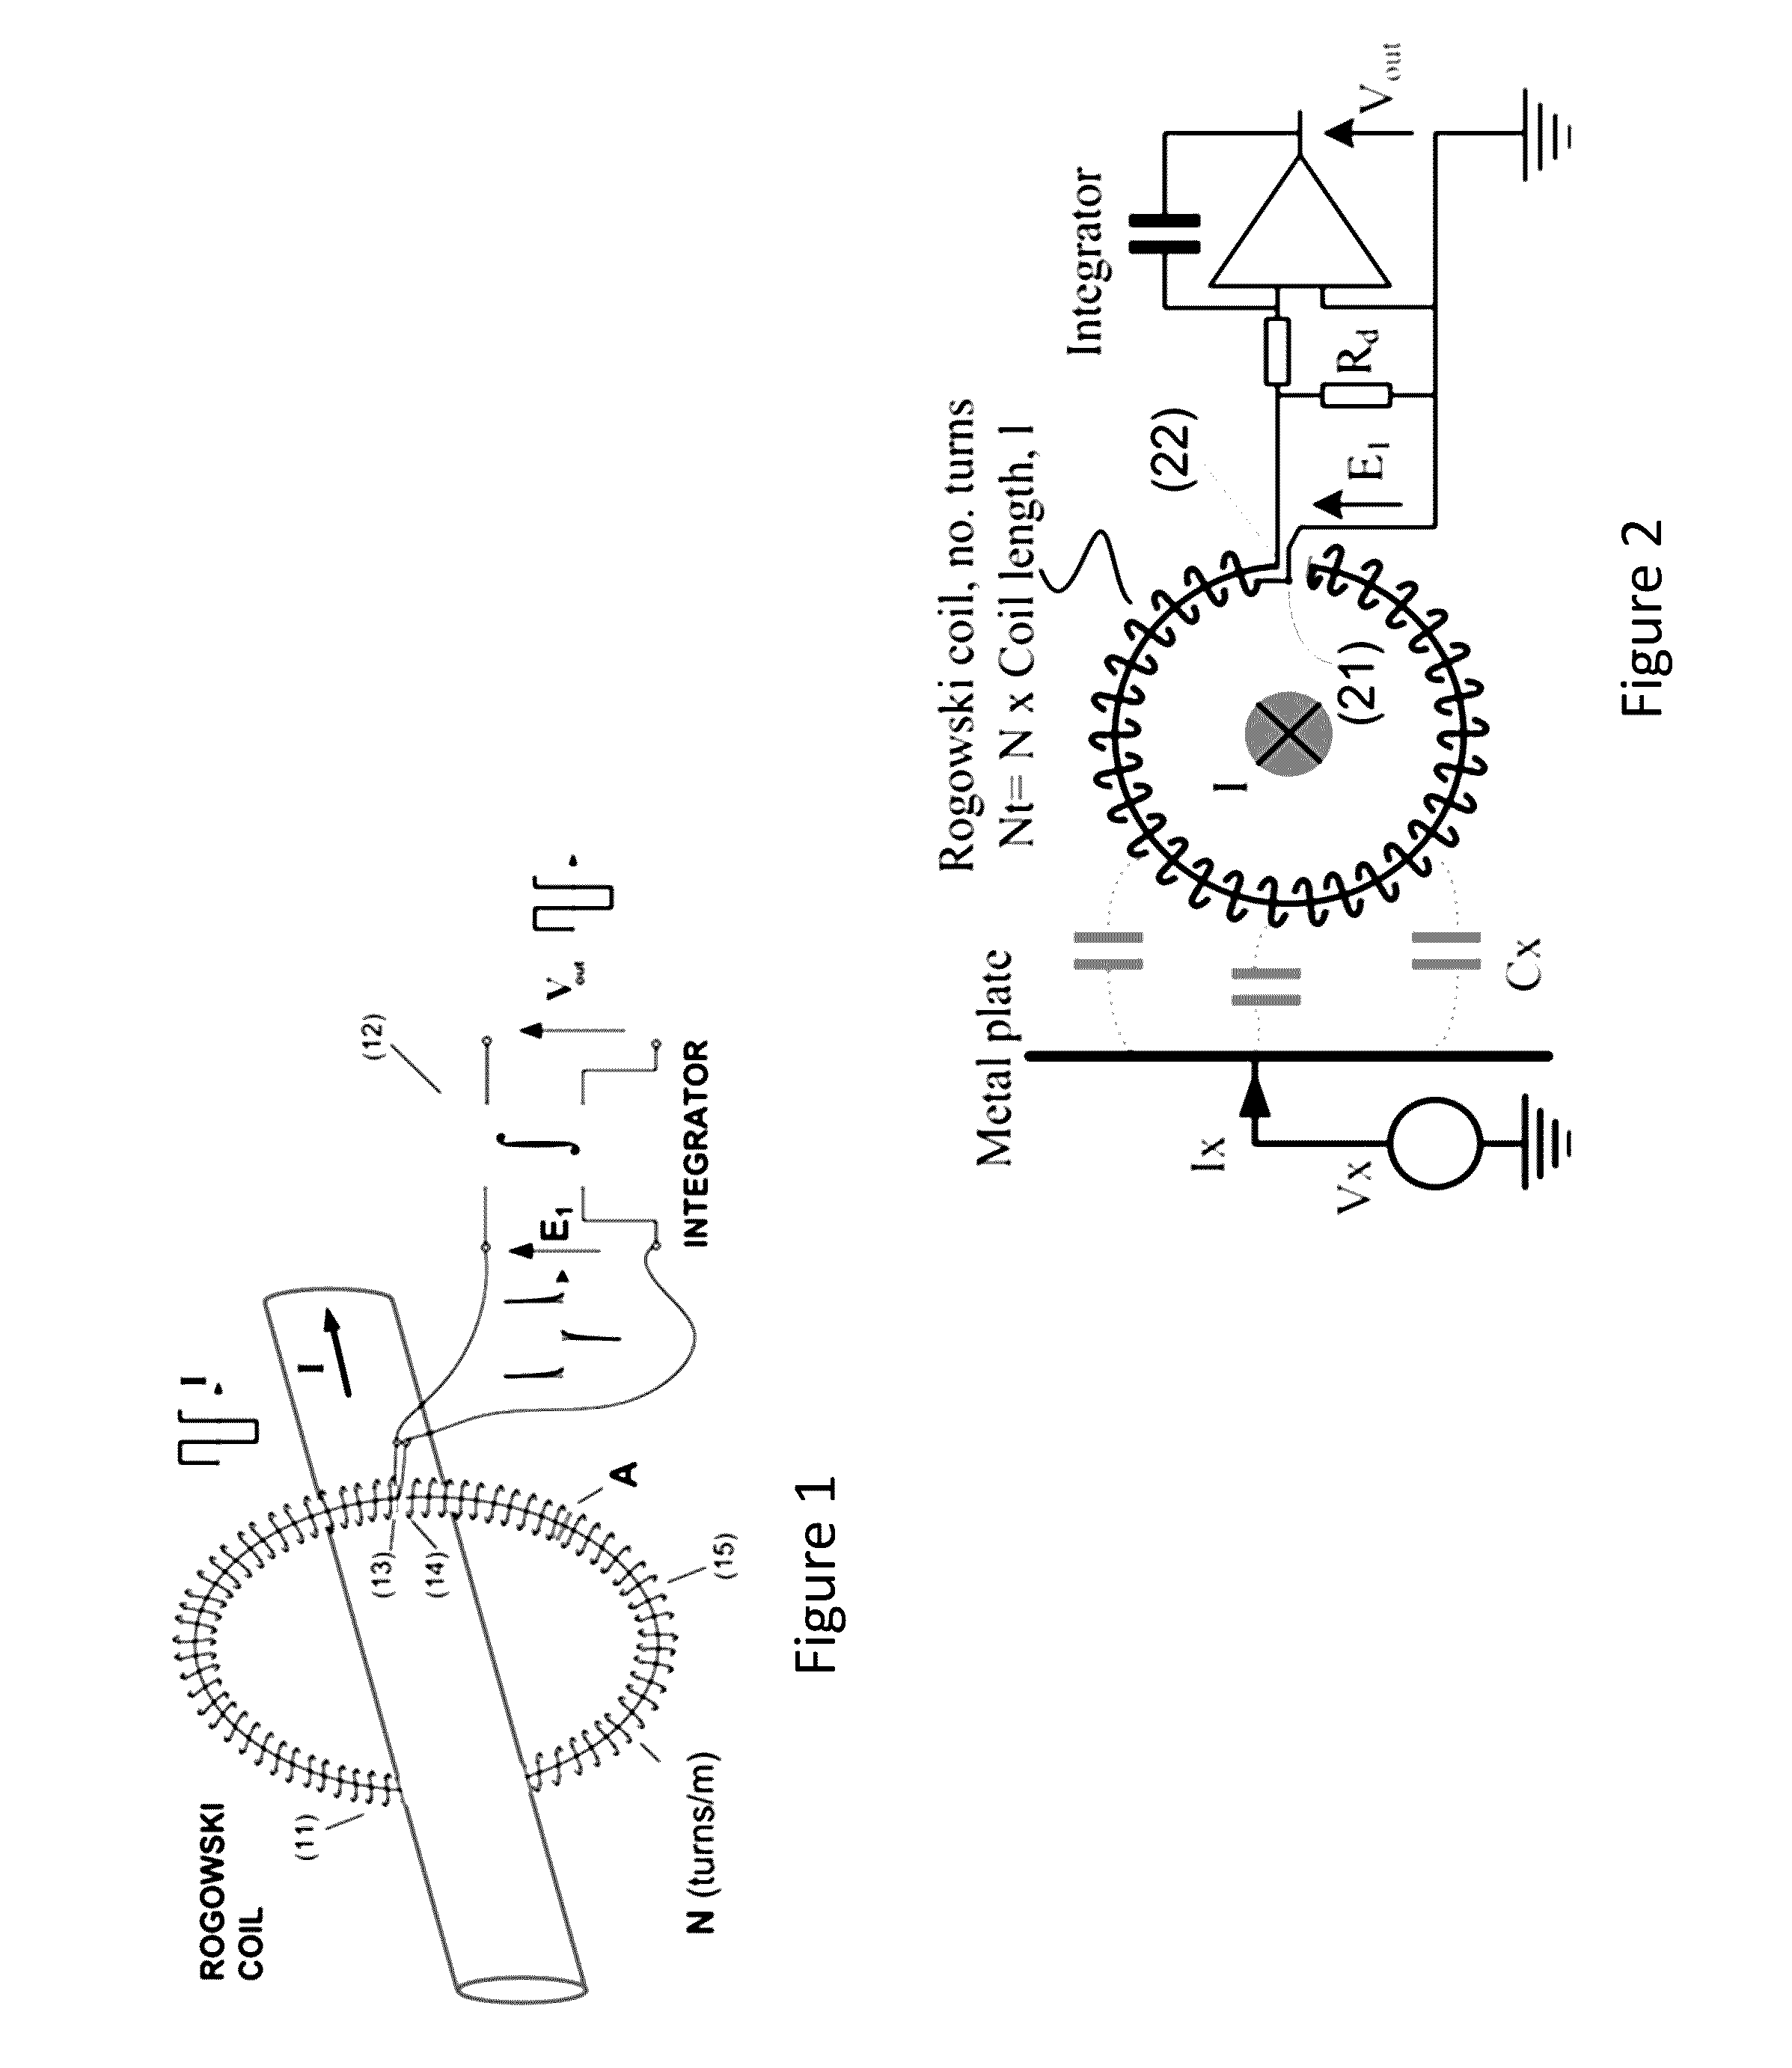 High bandwidth rogowski transducer with screened coil